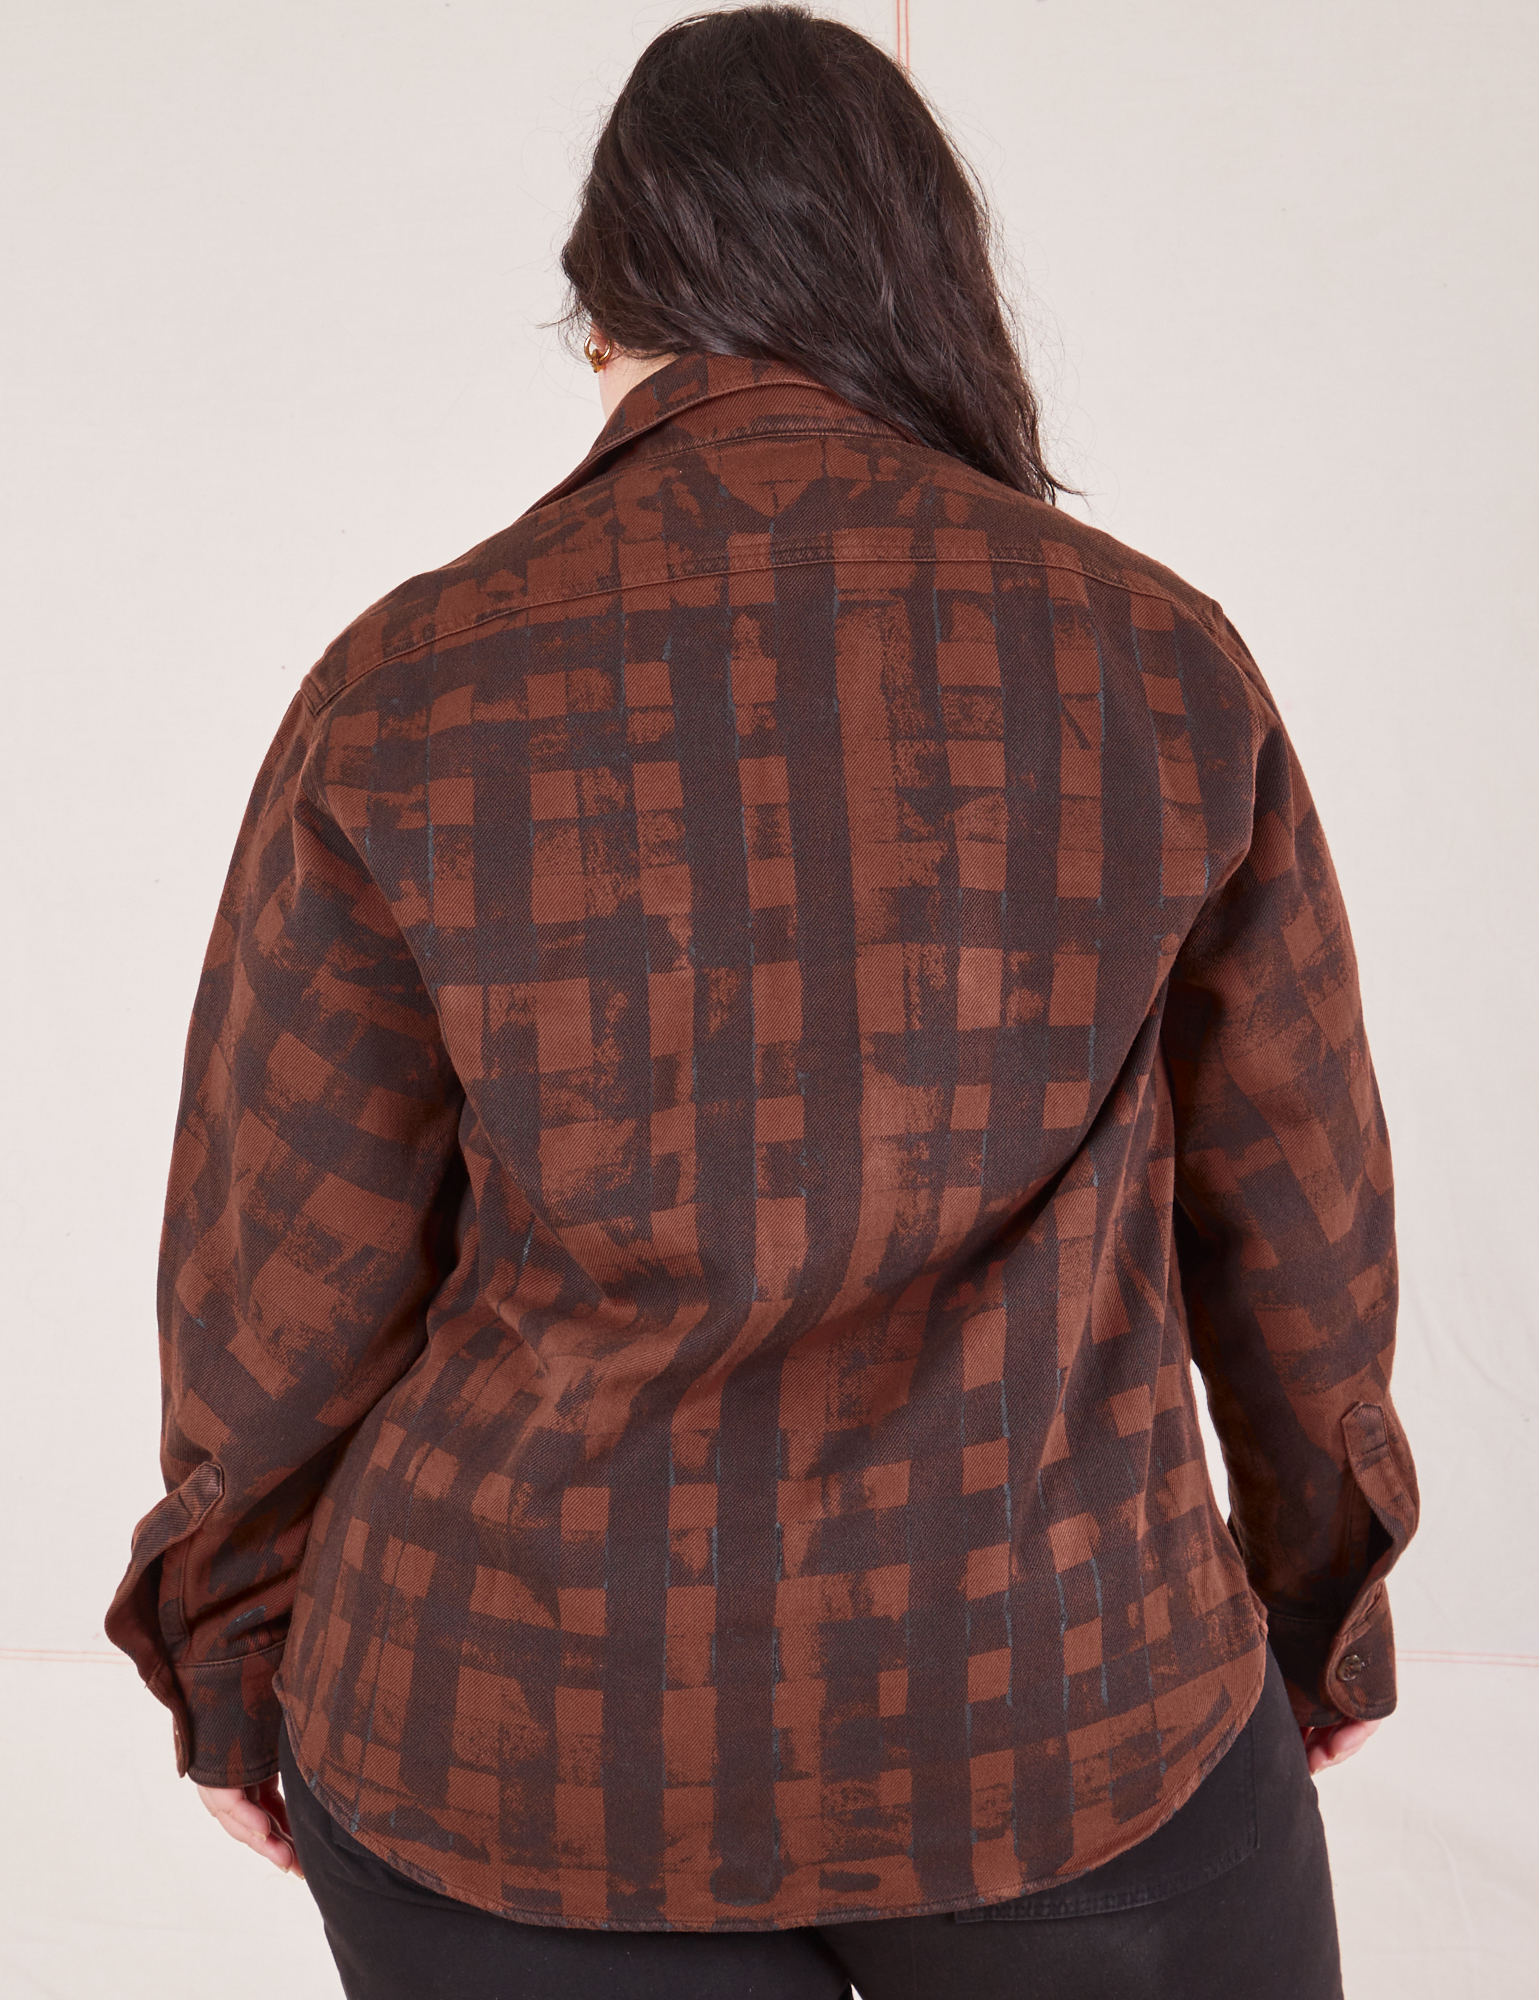 Plaid Flannel Overshirt in Fudgesicle Brown back view on Ashley